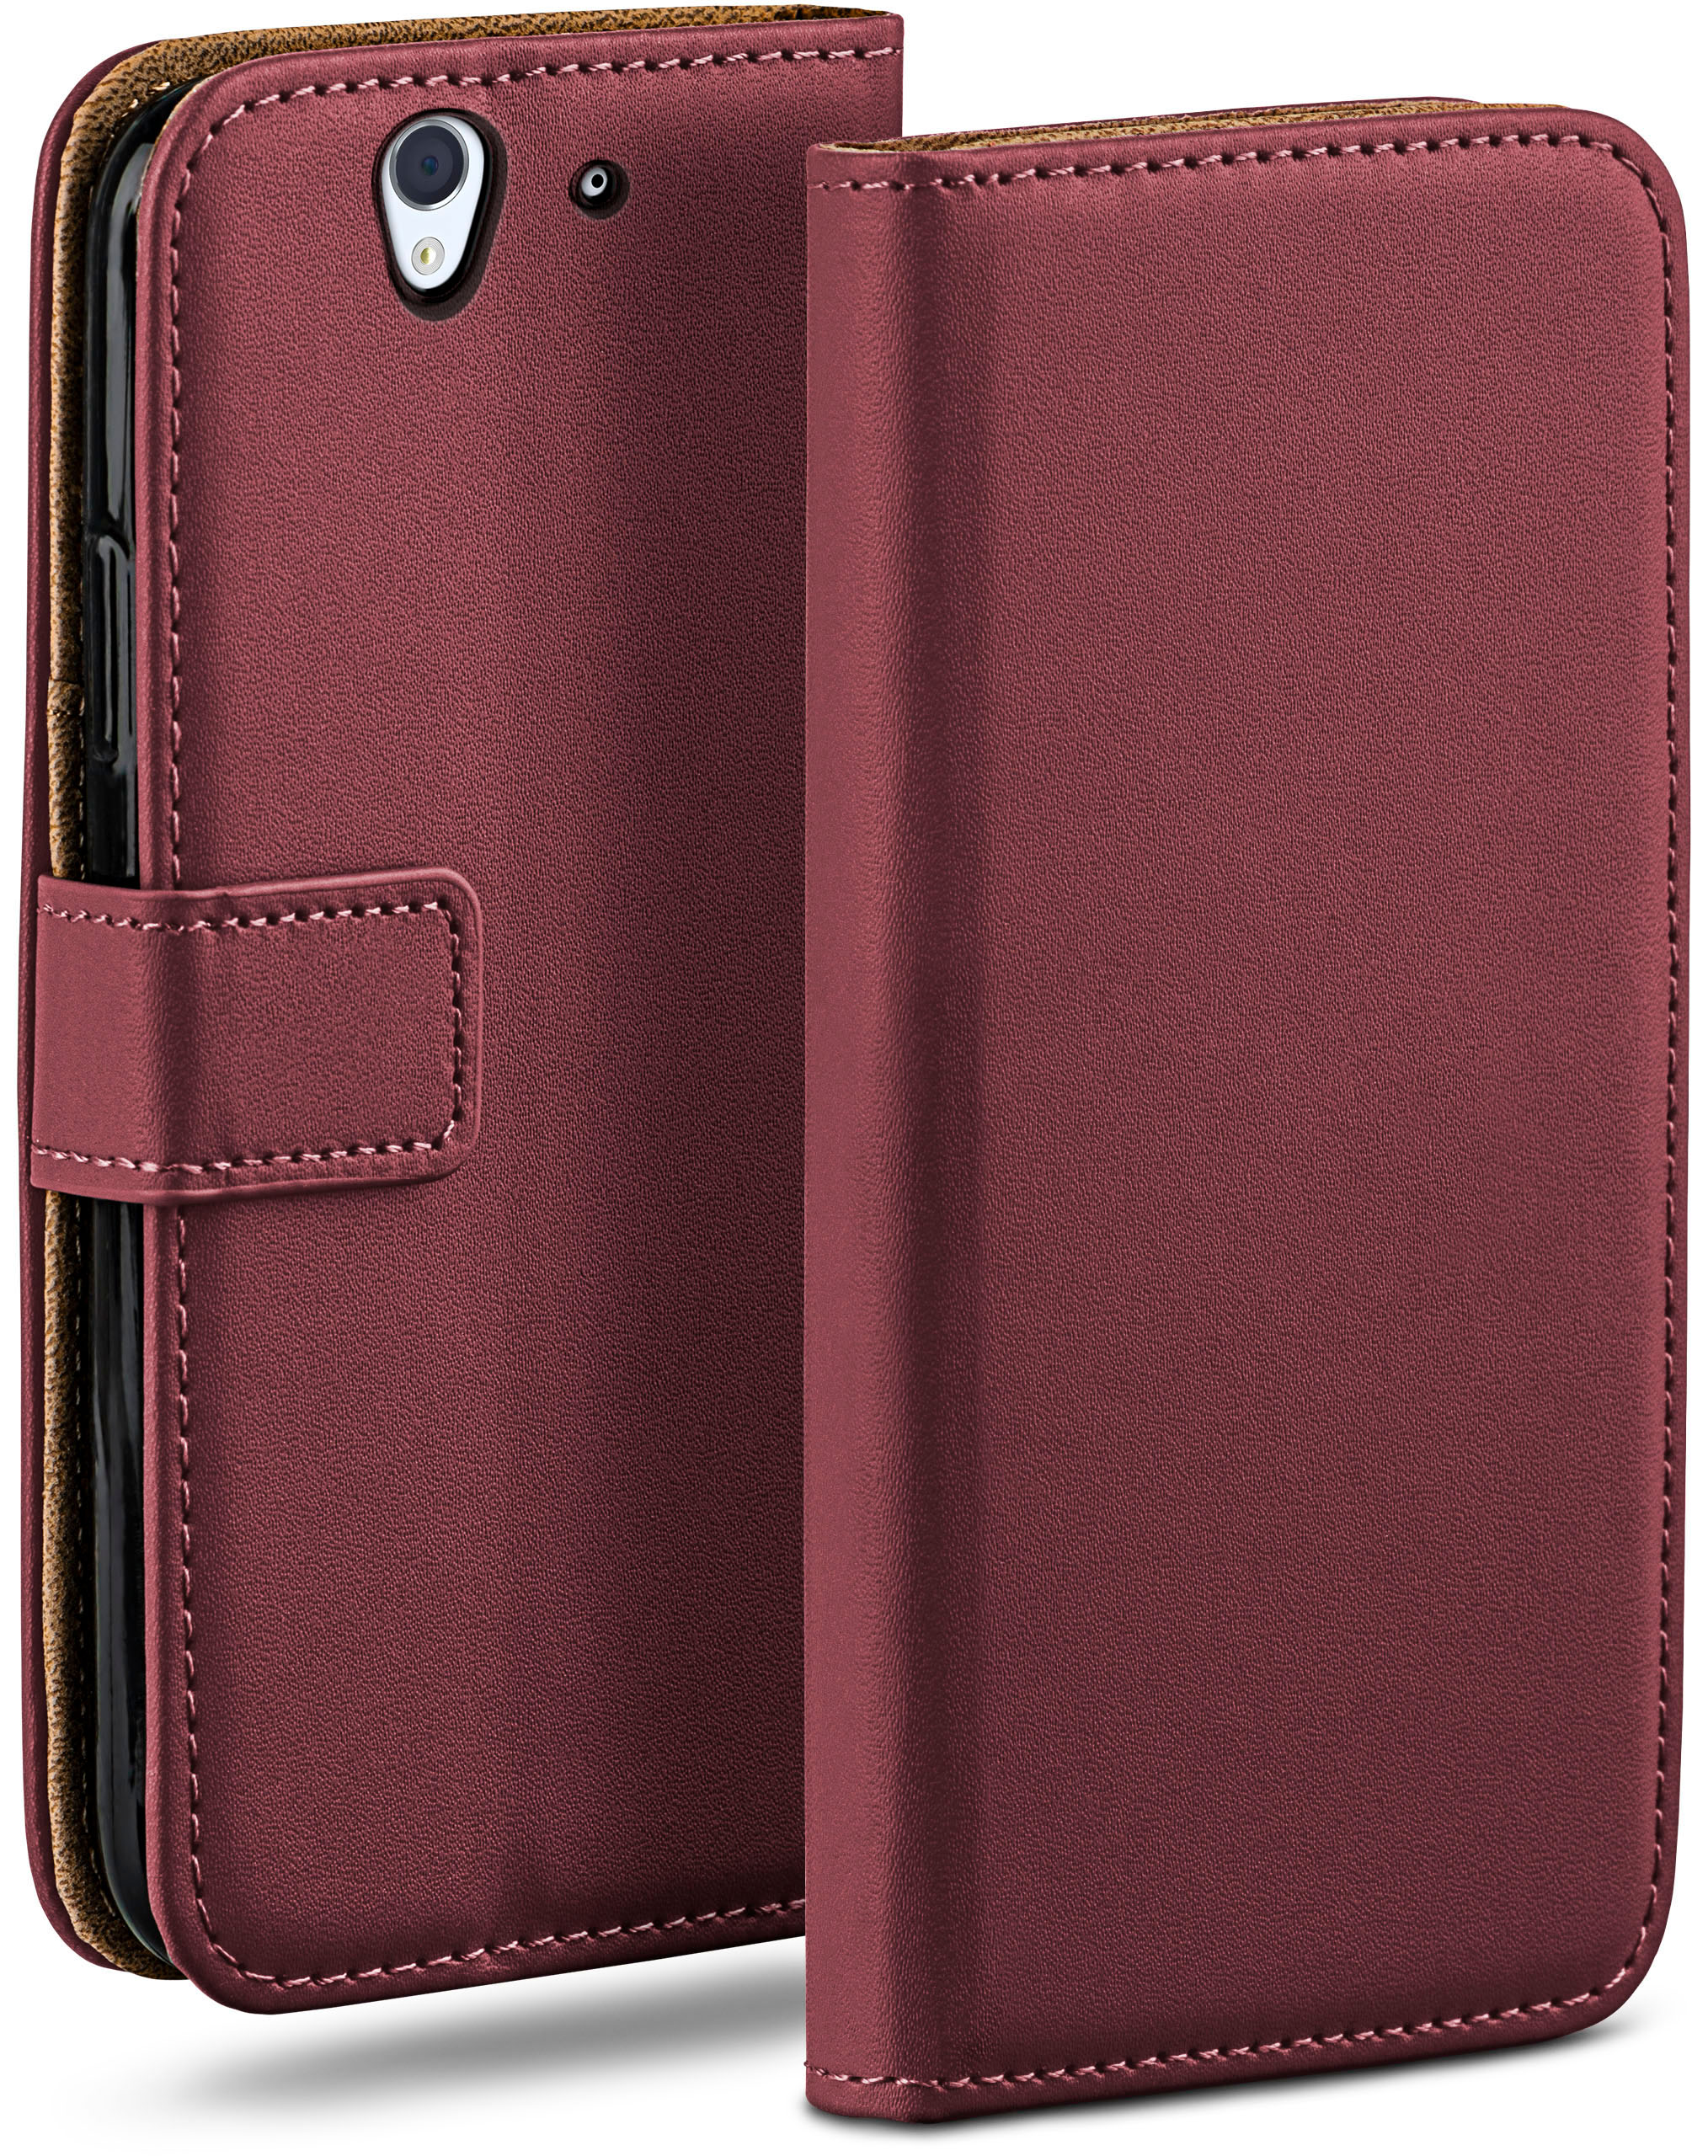 Case, Book Sony, Bookcover, Z, Xperia Maroon-Red MOEX